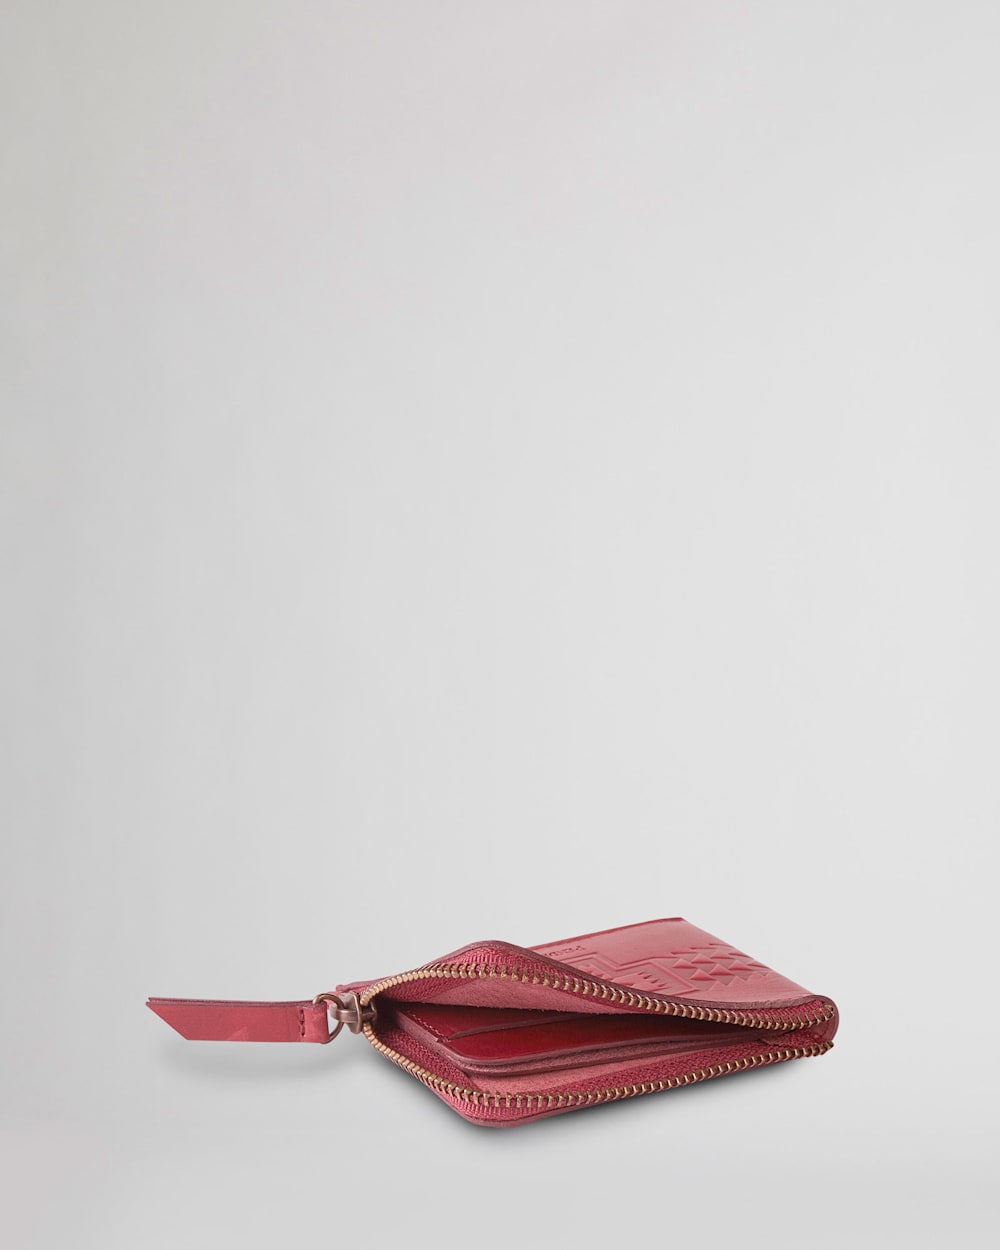 ALTERNATE VIEW OF LEATHER EMBOSSED ZIP WALLET IN RED image number 2